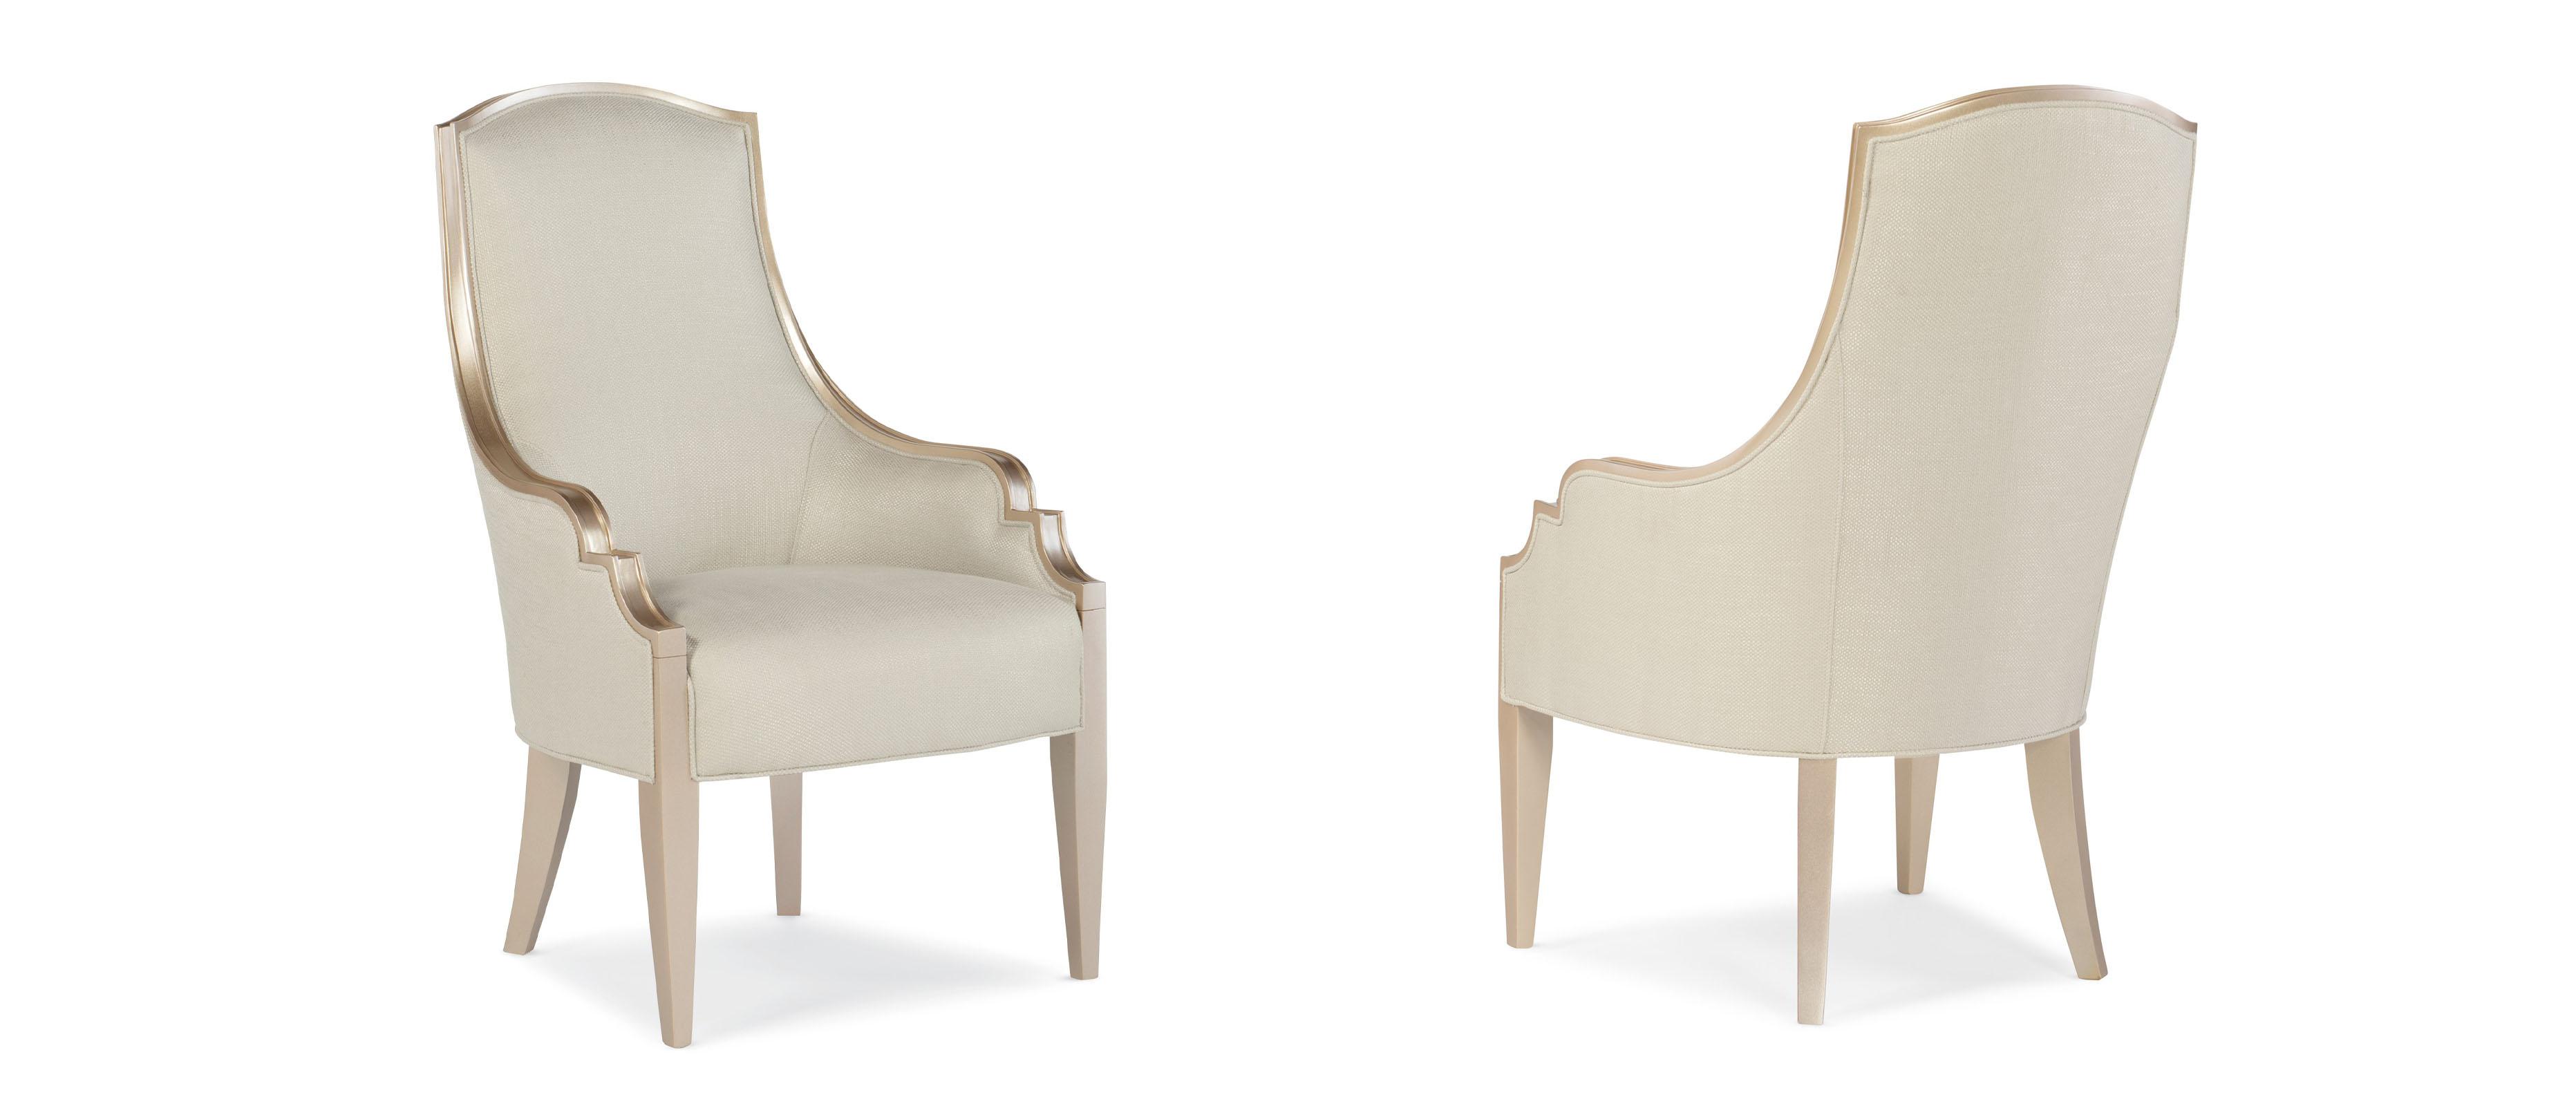 Contemporary Arm Chairs ADELA ARM CHAIR C012-016-271-Set-2 in Off-White, Light Grey, Taupe Fabric